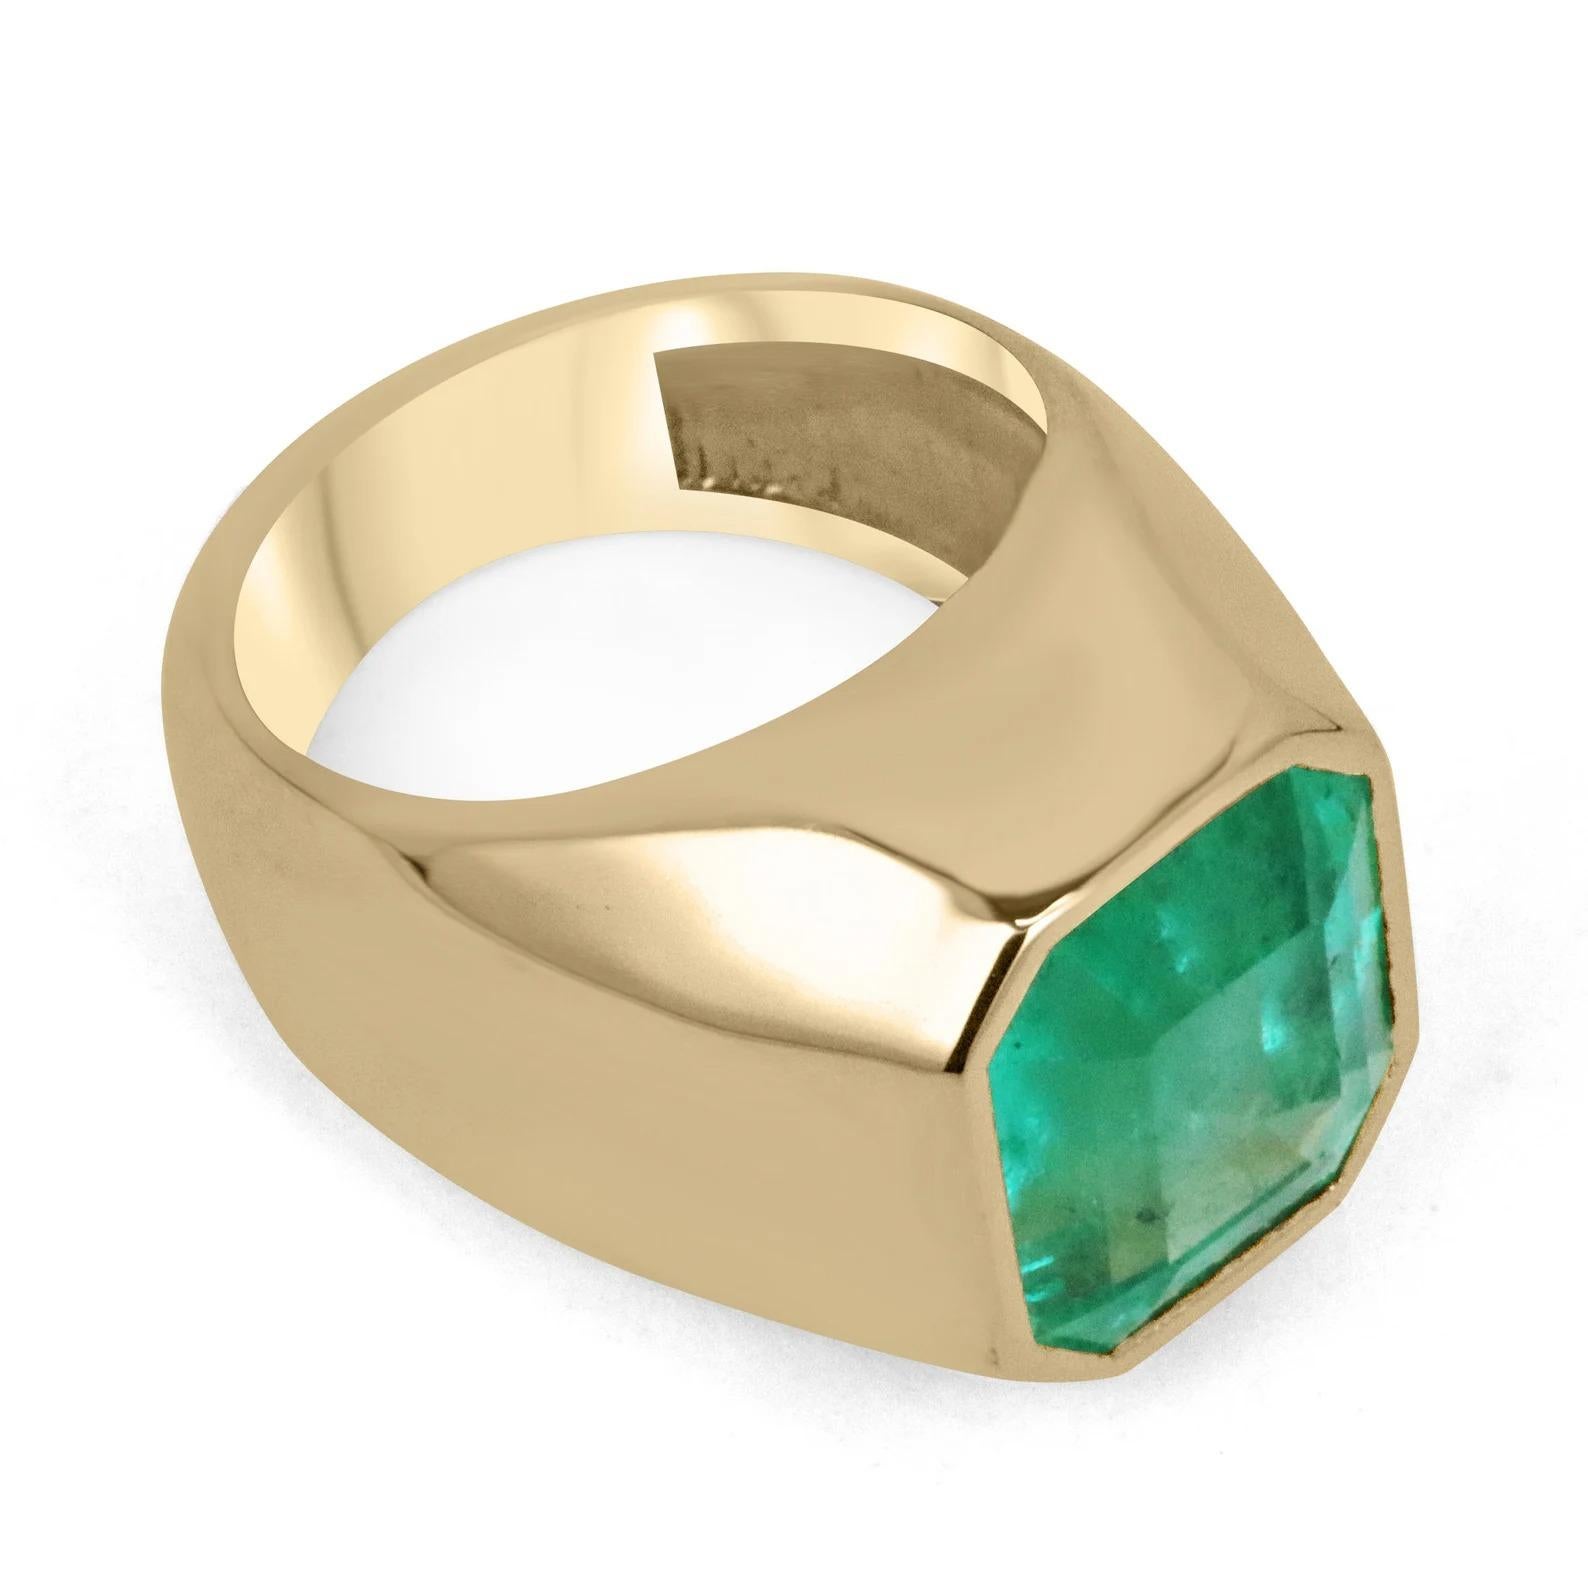 A one-of-a-kind, exclusive, LARGE TOP QUALITY Colombian emerald solitaire HULK ring. Dexterously handcrafted in gleaming solid 18K yellow gold, this ring features a HUGE 8.51-carat natural ethically sourced Colombian emerald, emerald cut from the